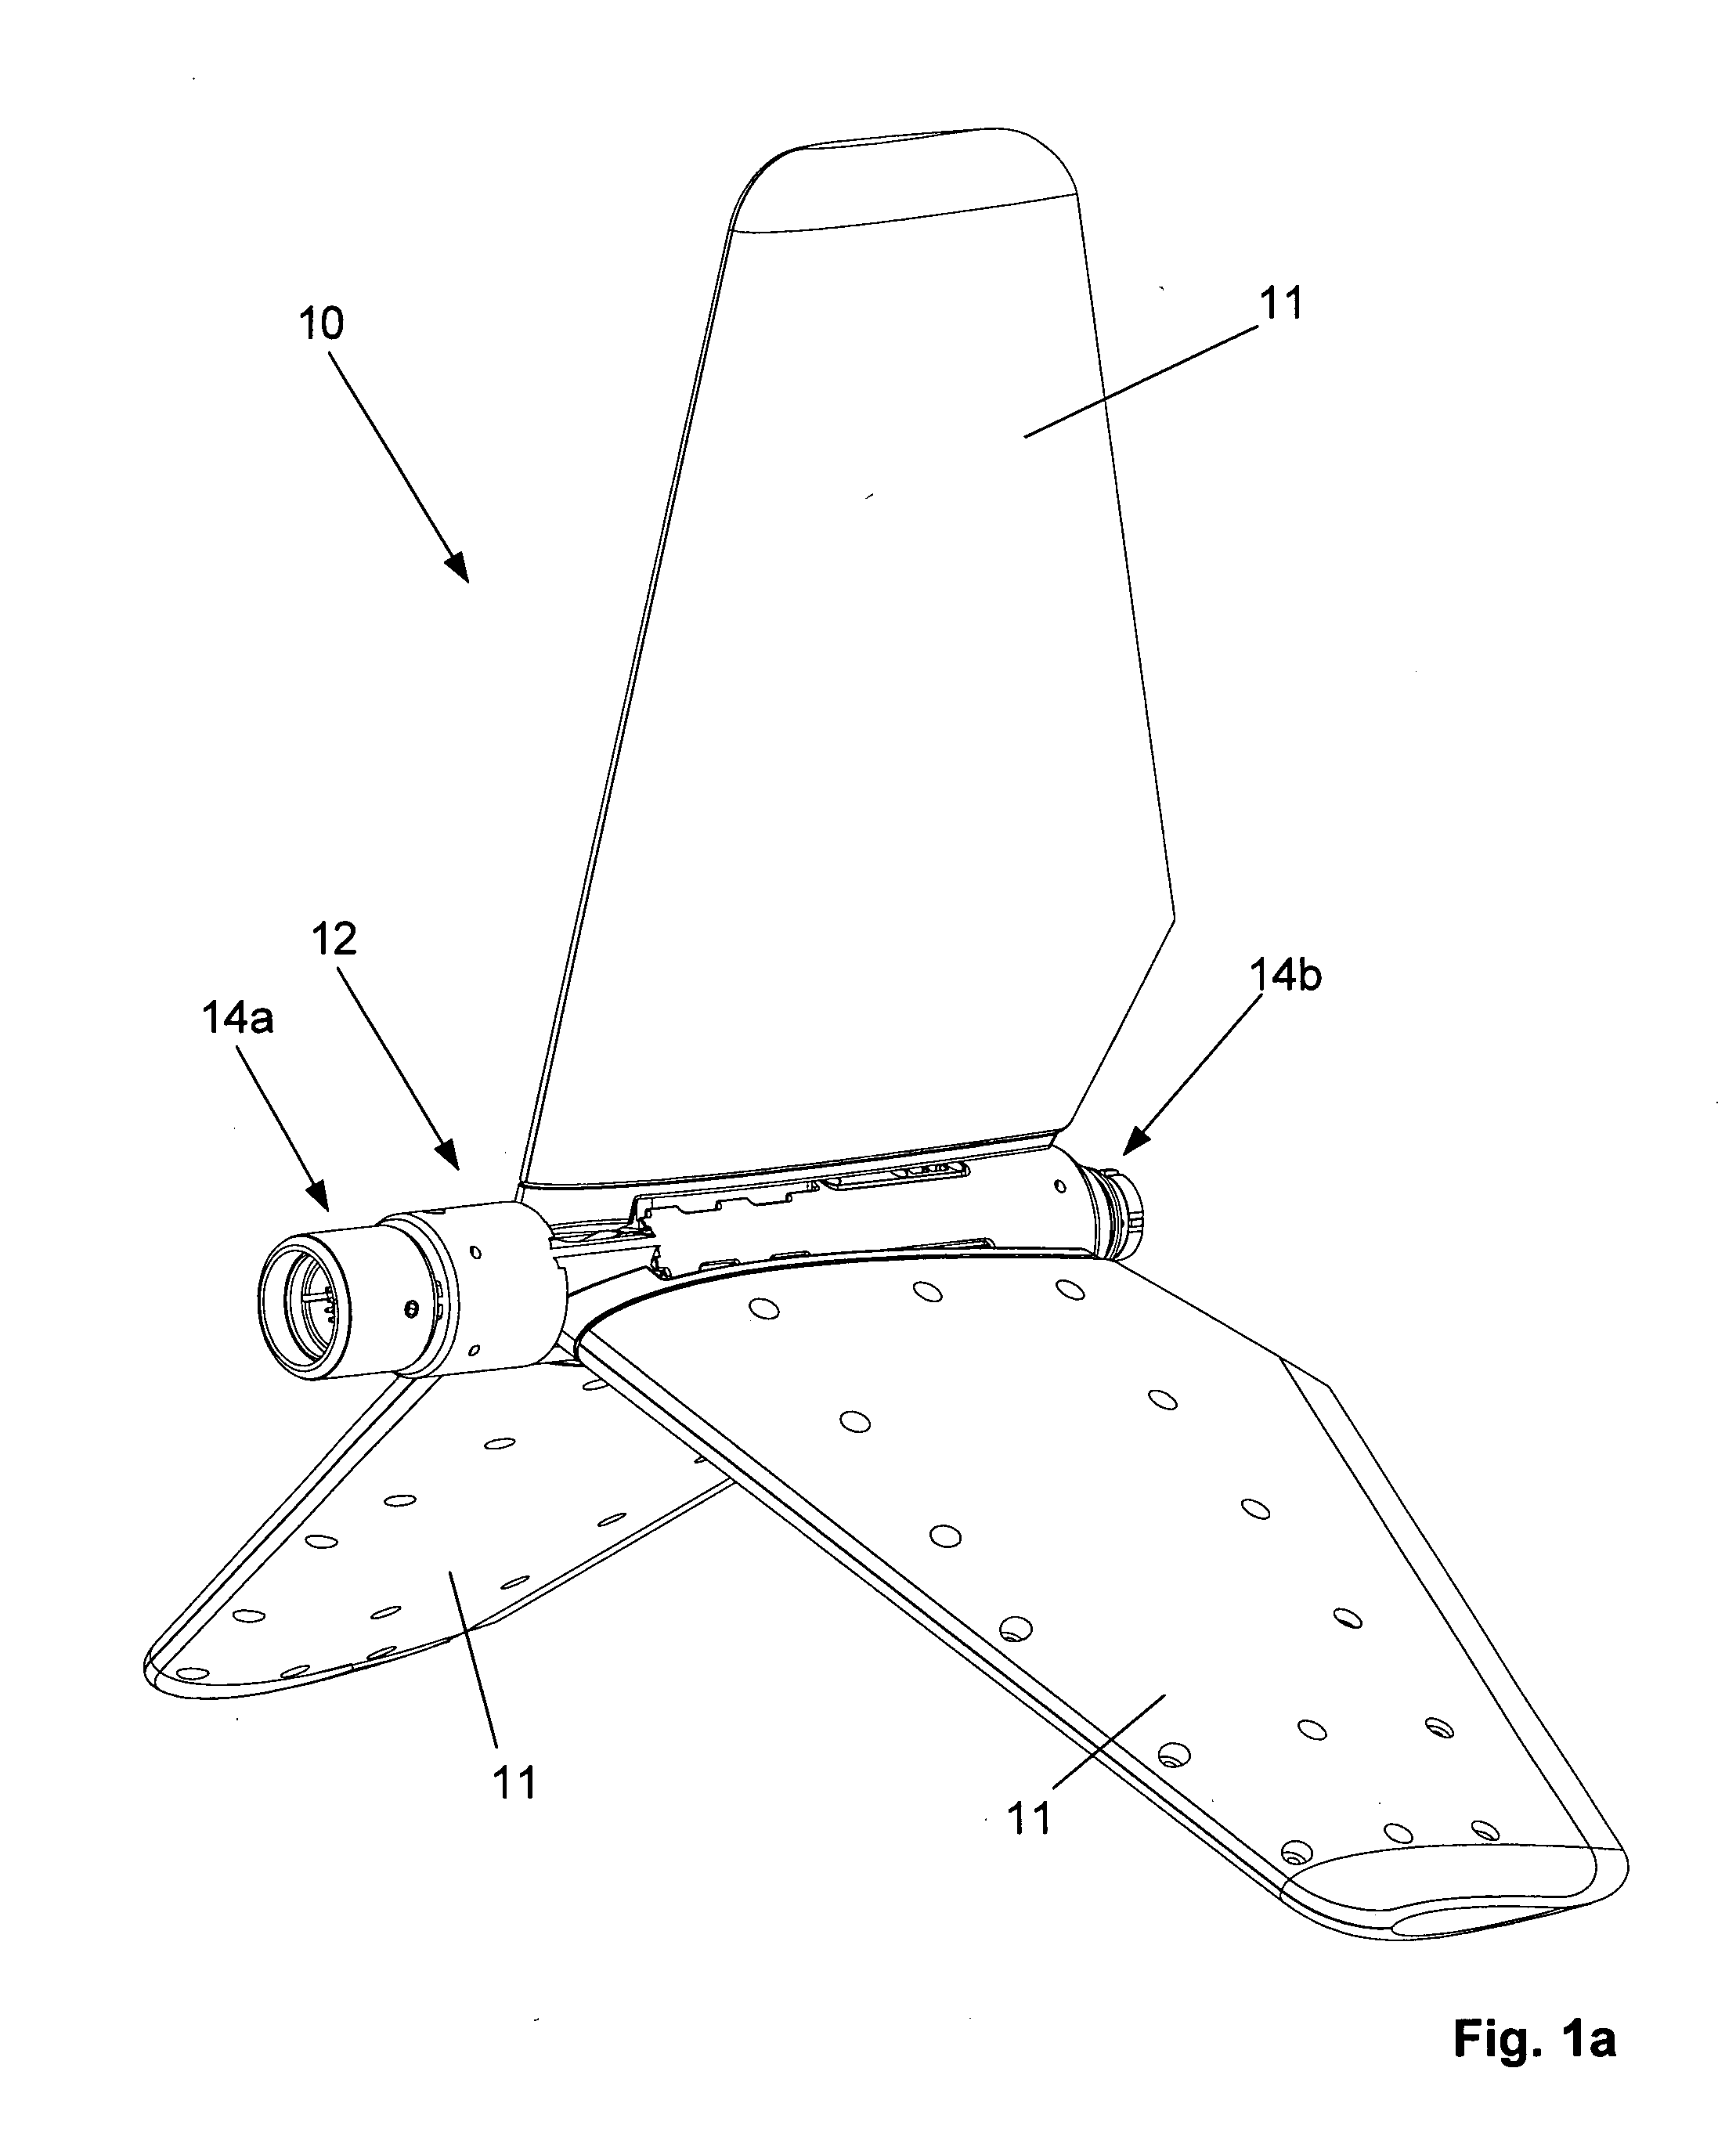 Control device for positioning an instrumented cable towed in water